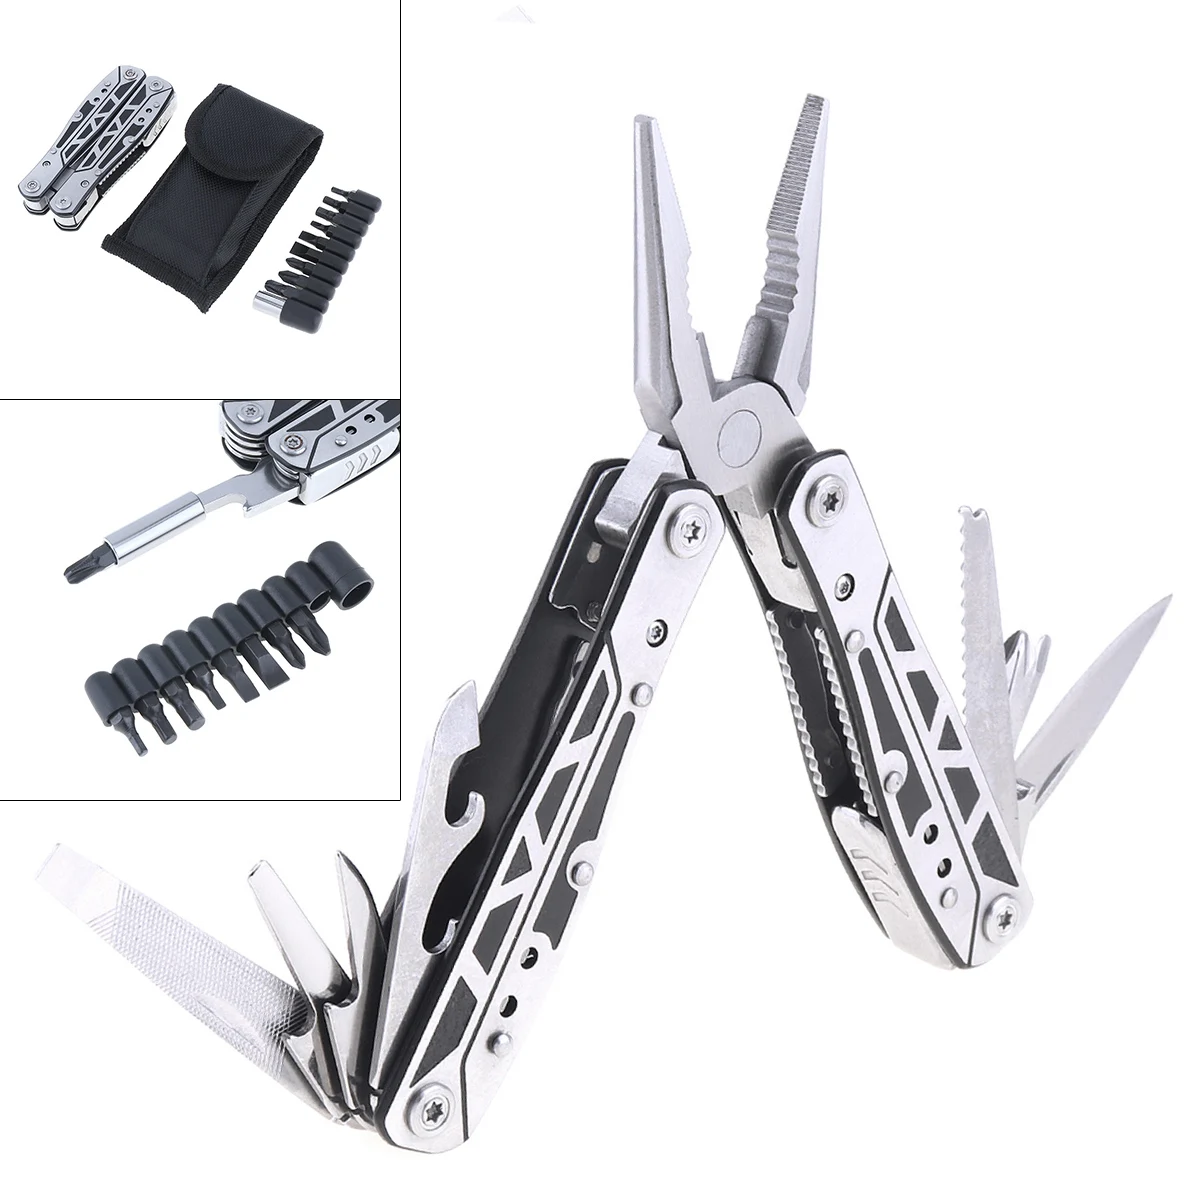 

Mini Multifunction Built-in Type Combination Folding Pliers Tool with Screwdriver Set and Hand Polished Surface Treatment